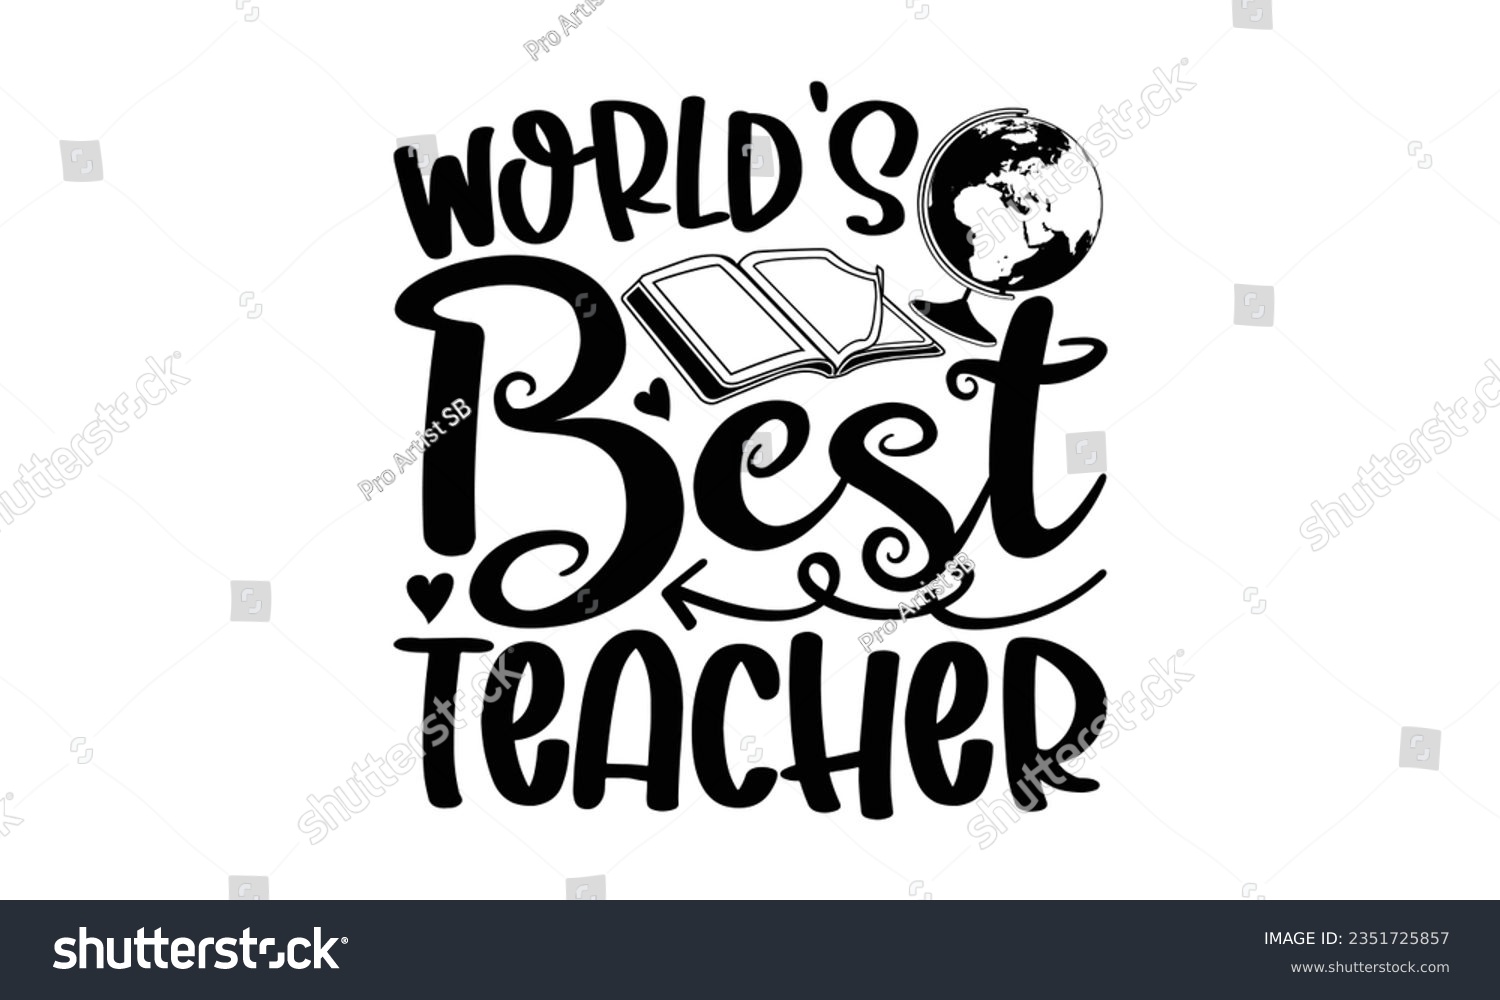 SVG of 
World’s best teacher - Teacher SVG Design, Teacher Lettering Design, Vector EPS Editable Files, Isolated On White Background, Prints on T-Shirts and Bags, Posters, Cards.
 svg